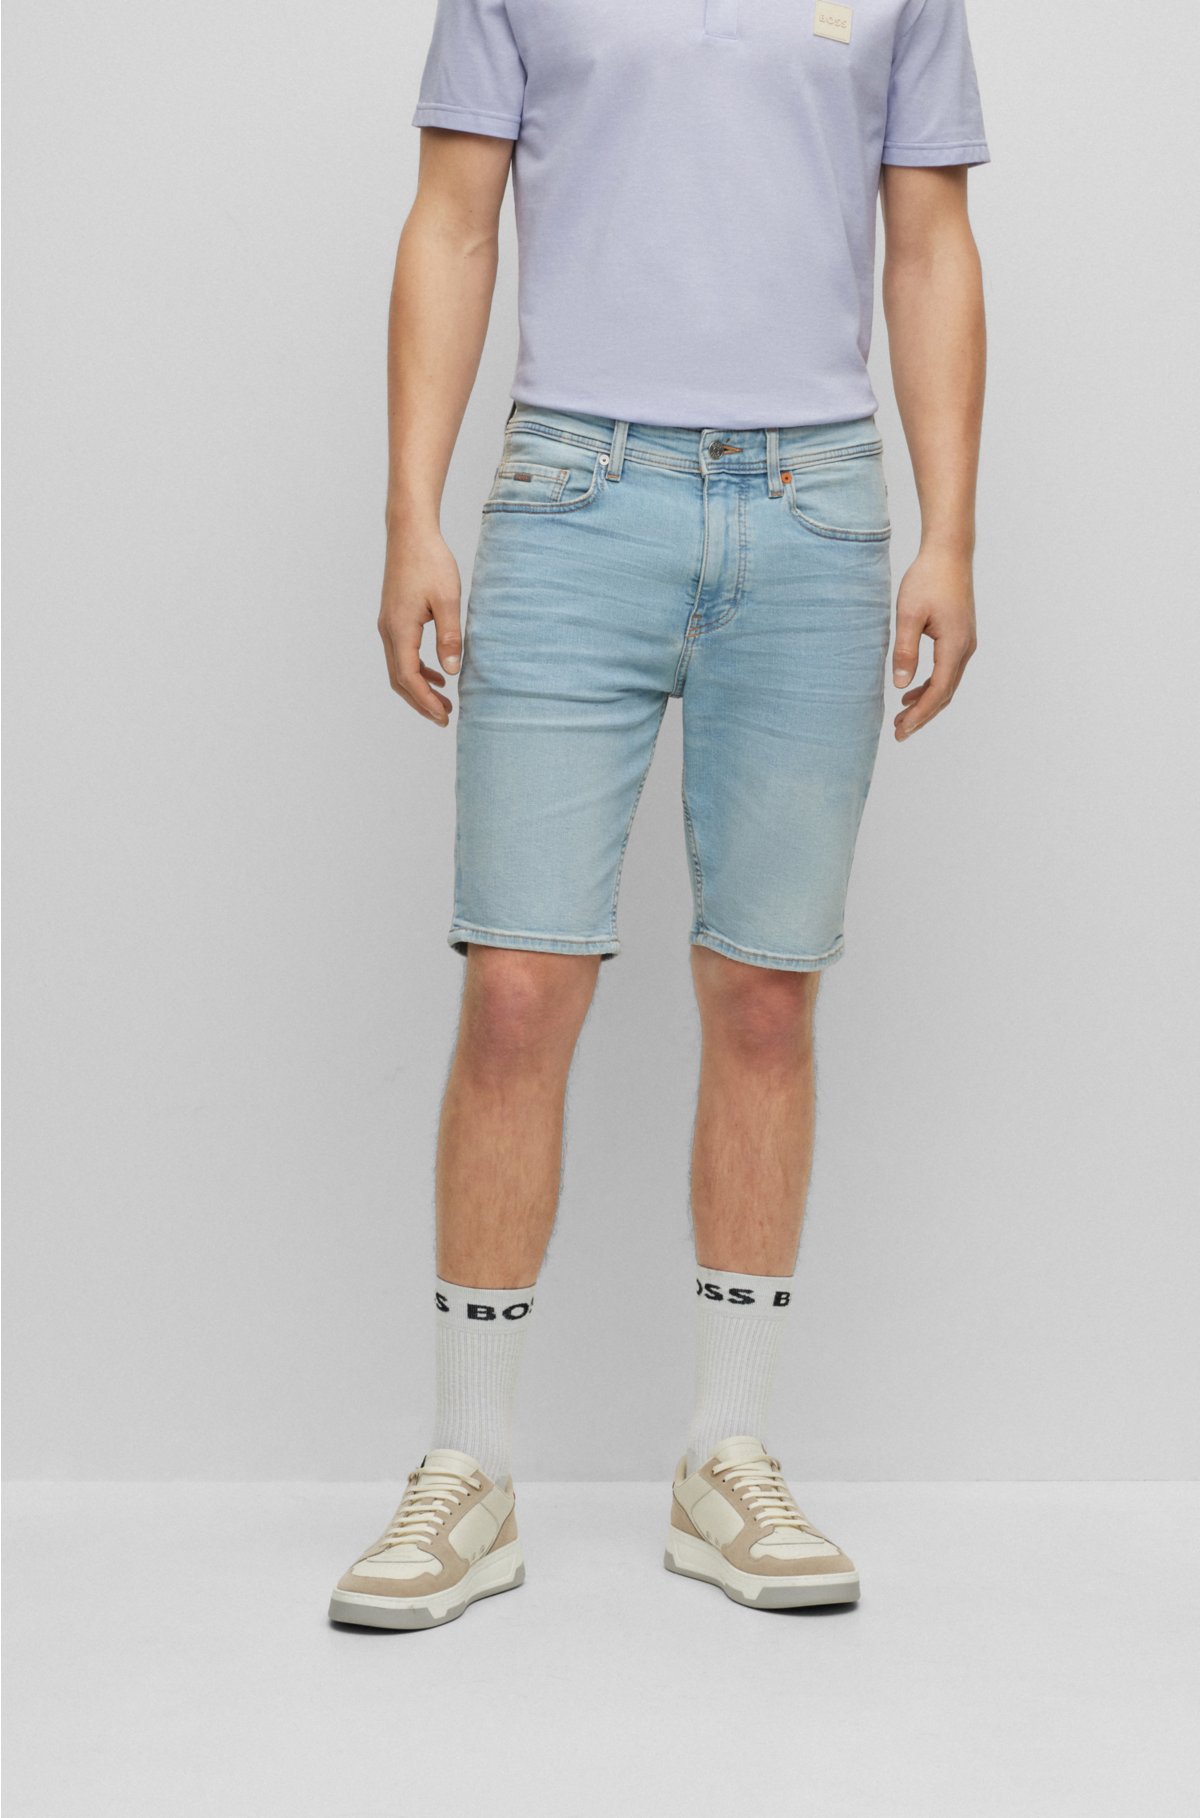 BOSS - Tapered-fit shorts in comfort-stretch denim